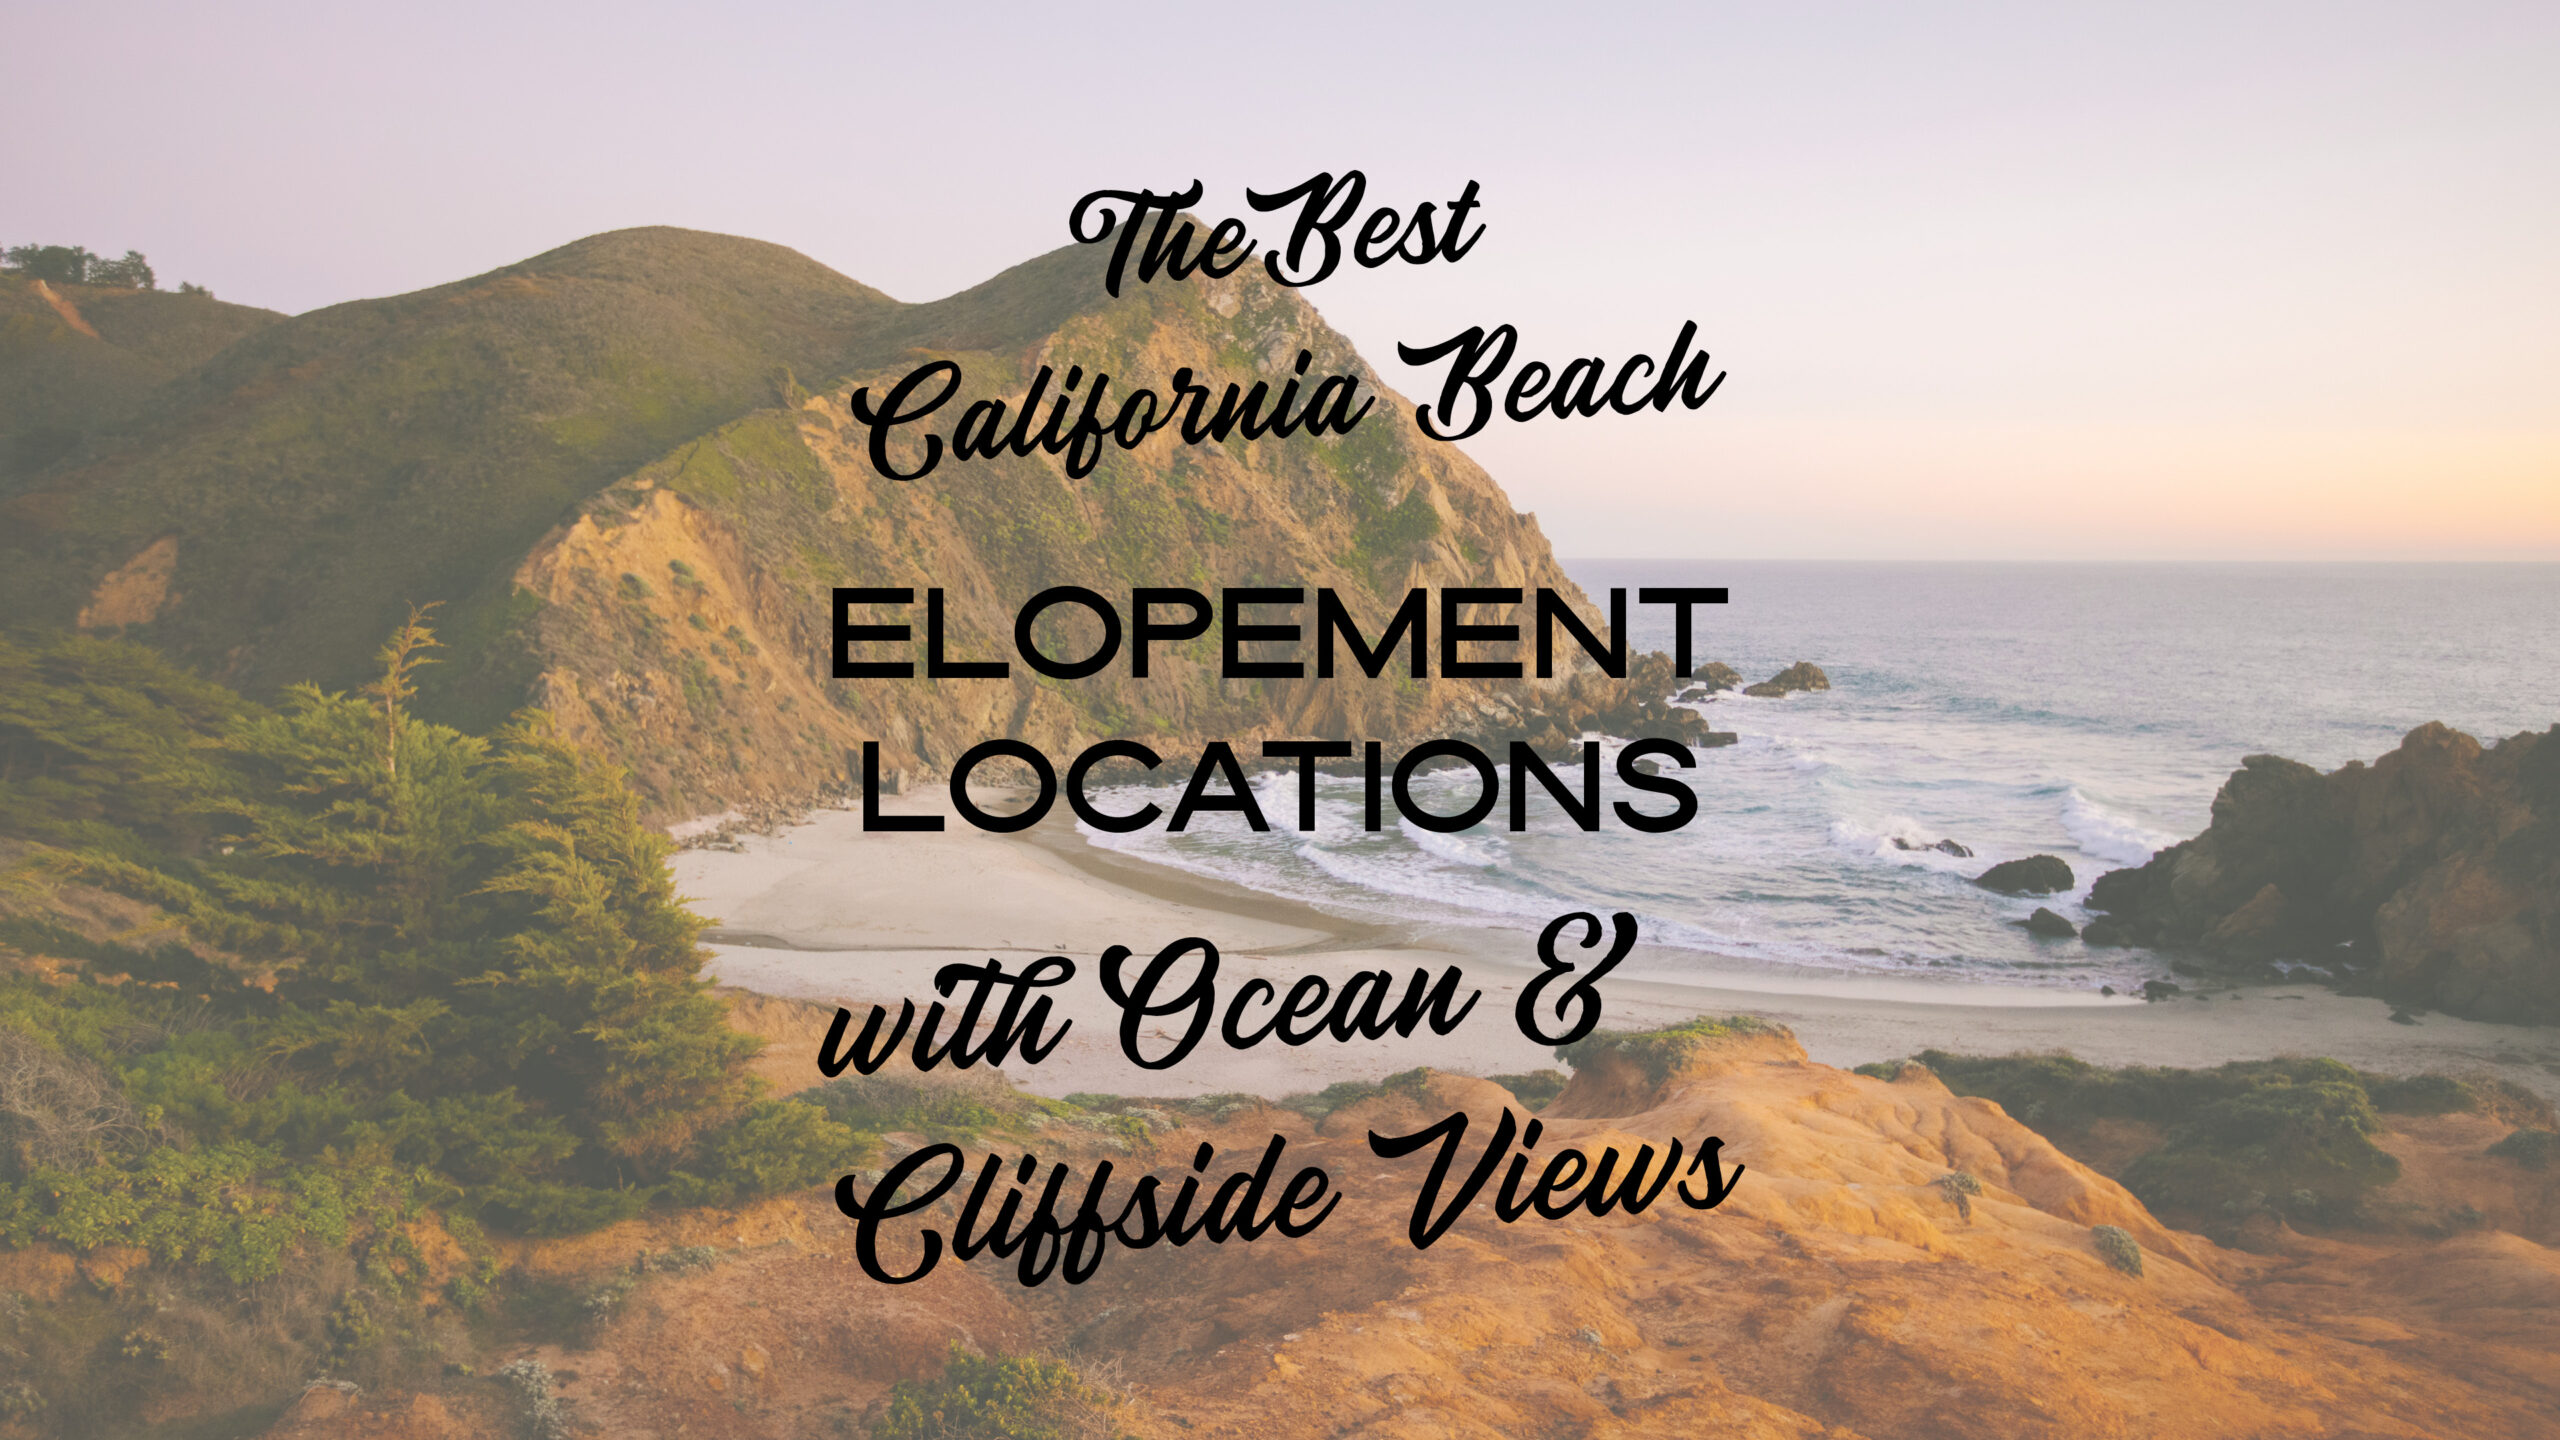 beach-locations-with-ocean-and-cliffside-views-scaled Best California Beach Elopement Locations with Ocean and Cliffside Views